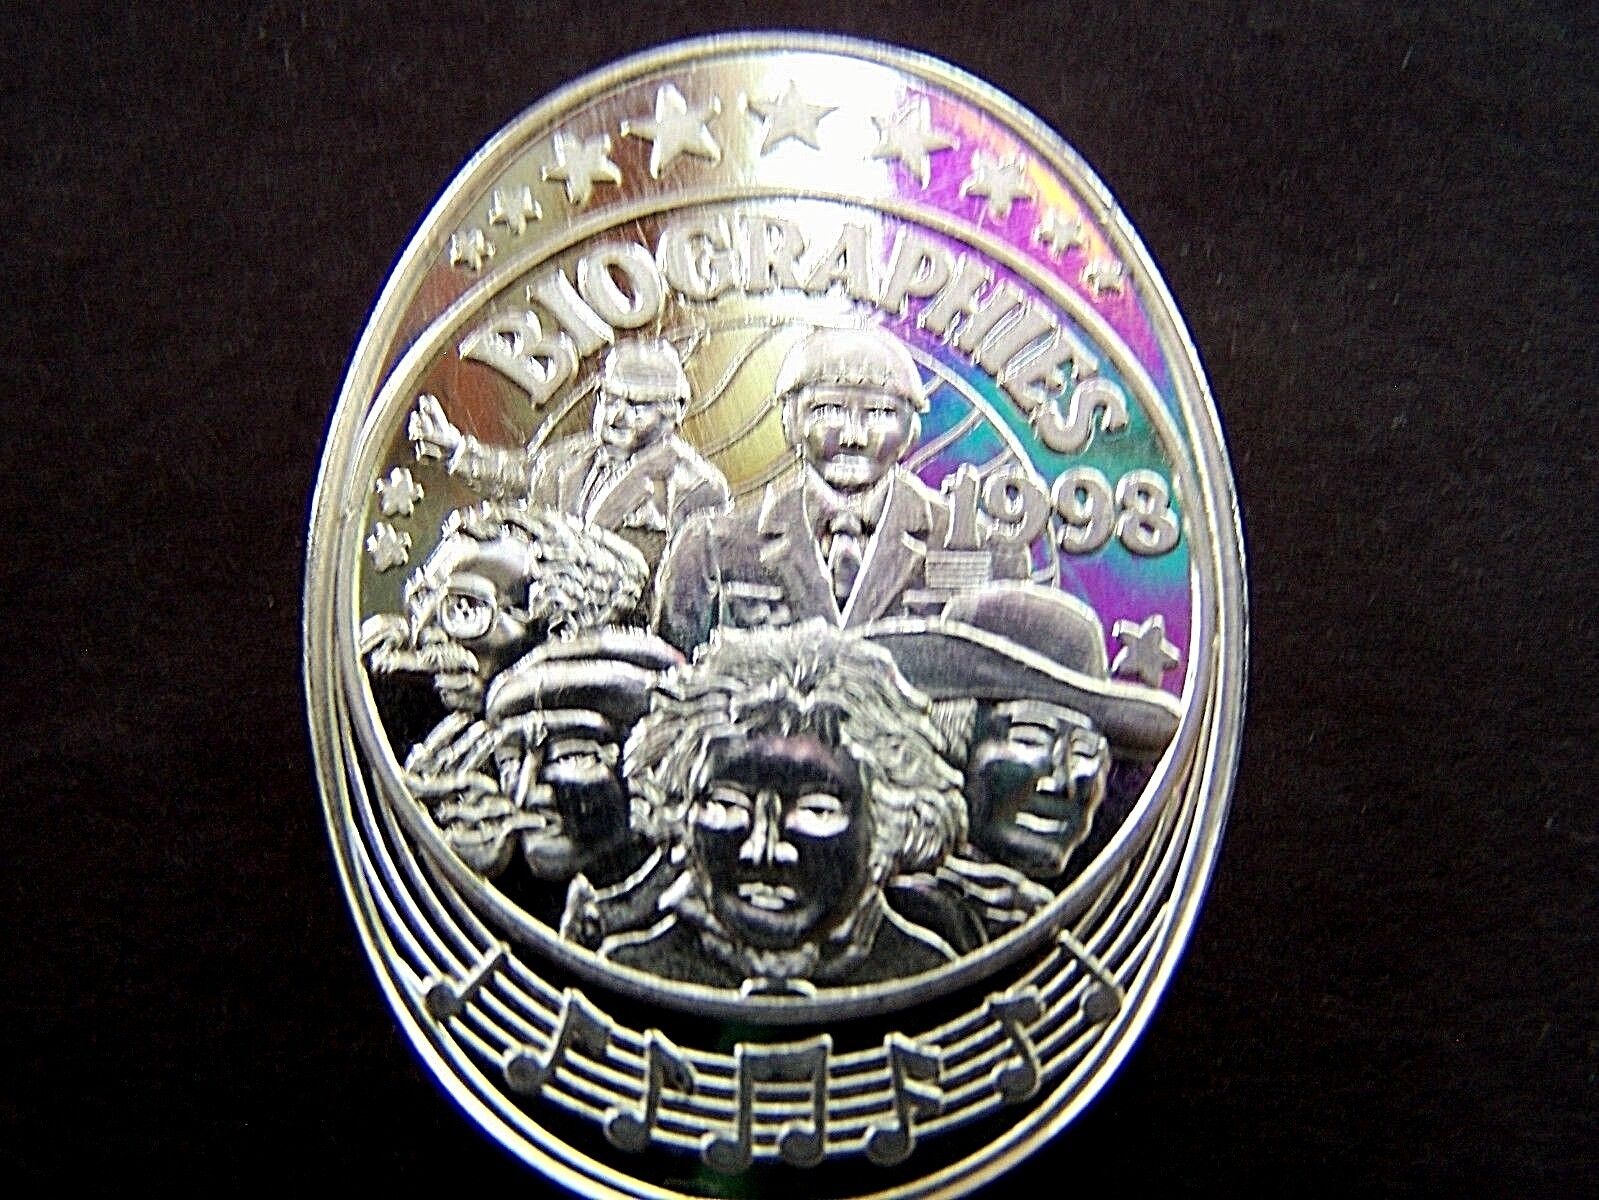 1998 Endymion BIOGRAPHIES Fine Silver Oval Mardi Gras Doubloon